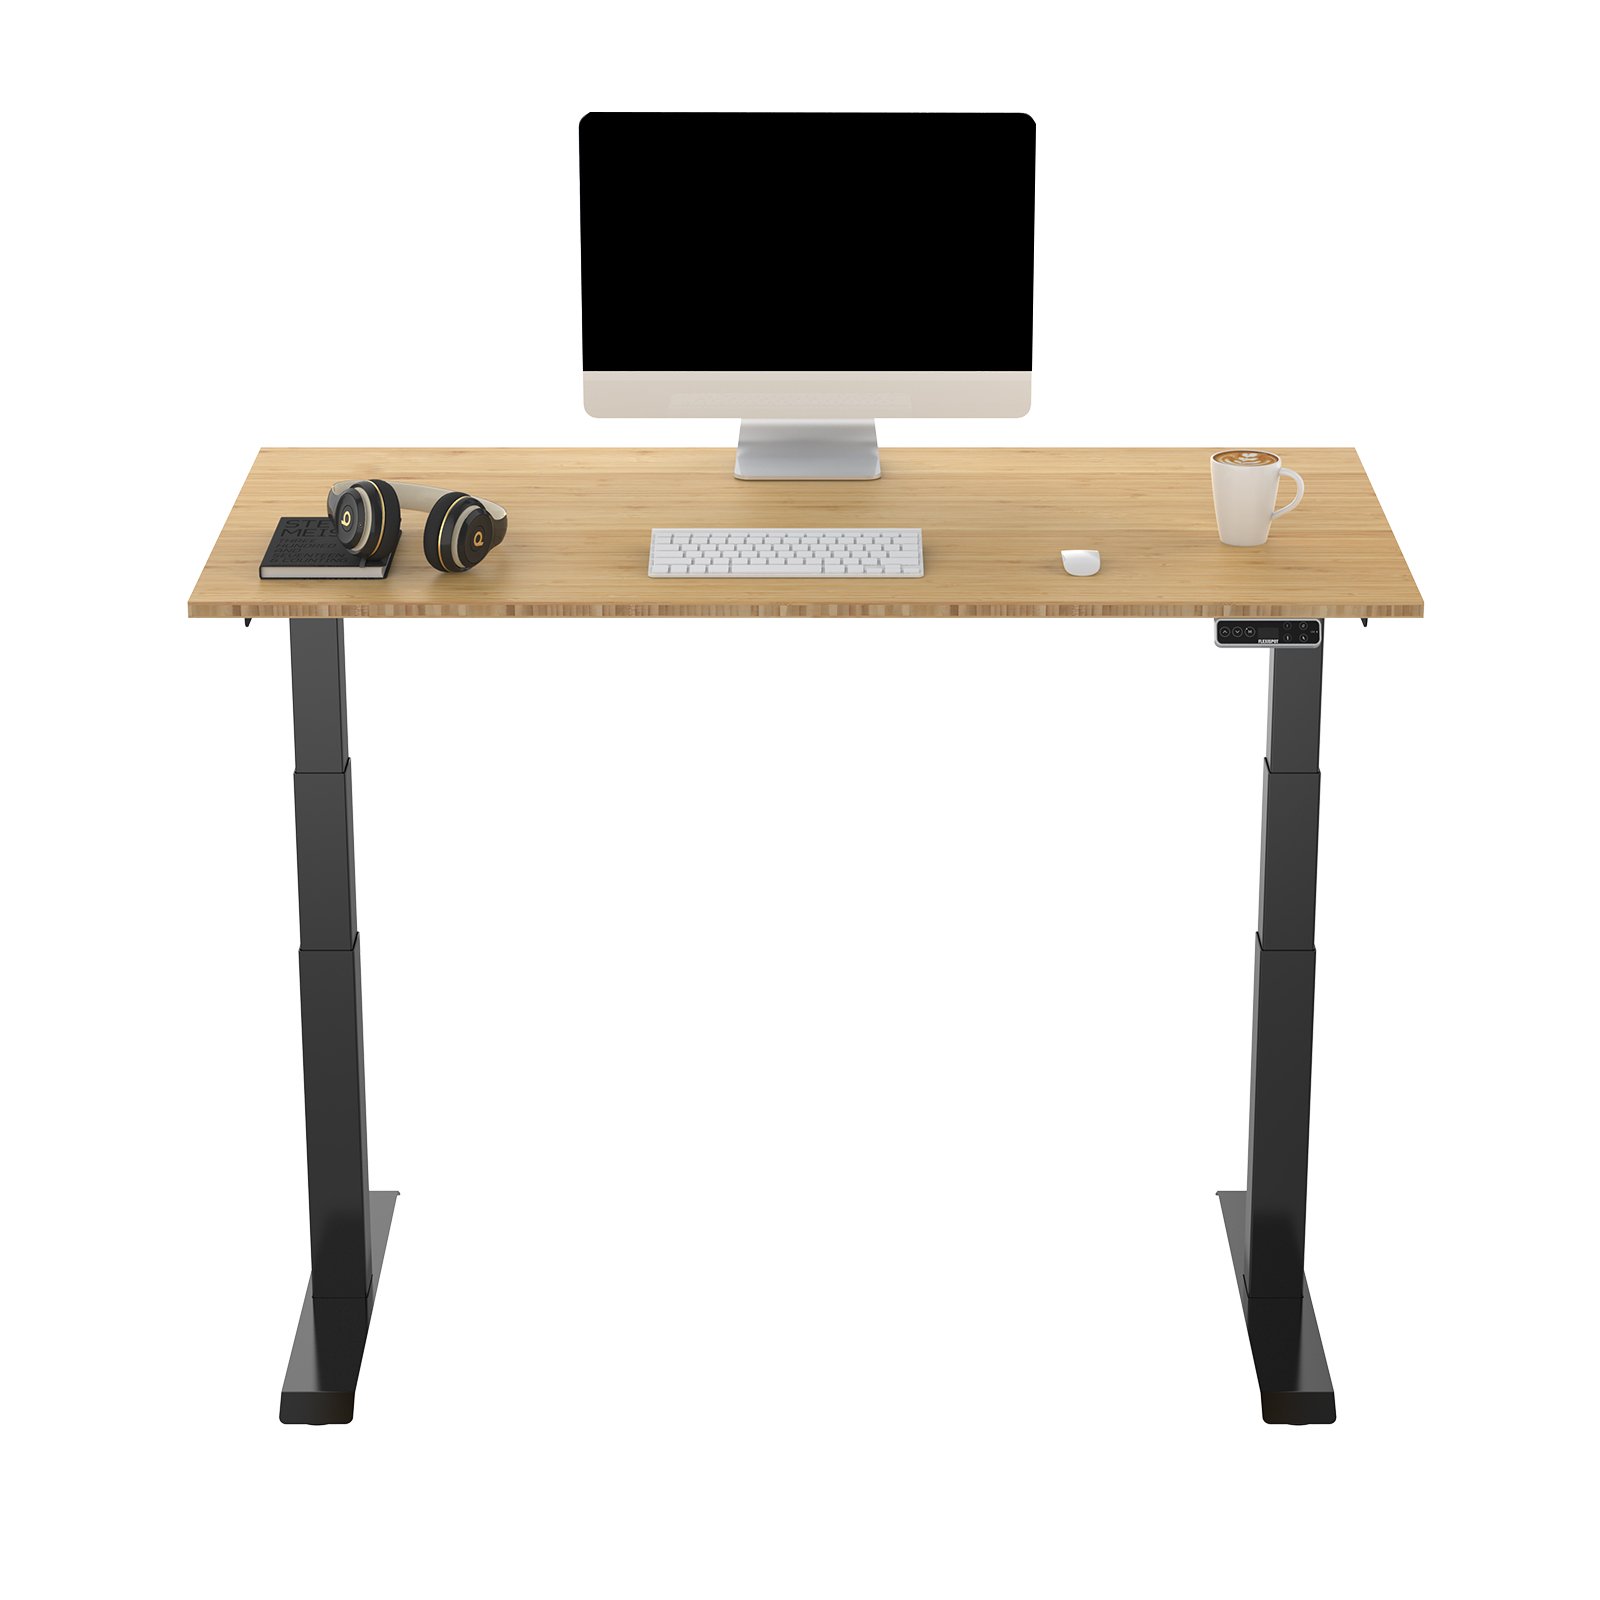 ED7 Height Adjustable Sit-Stand Electric Desk